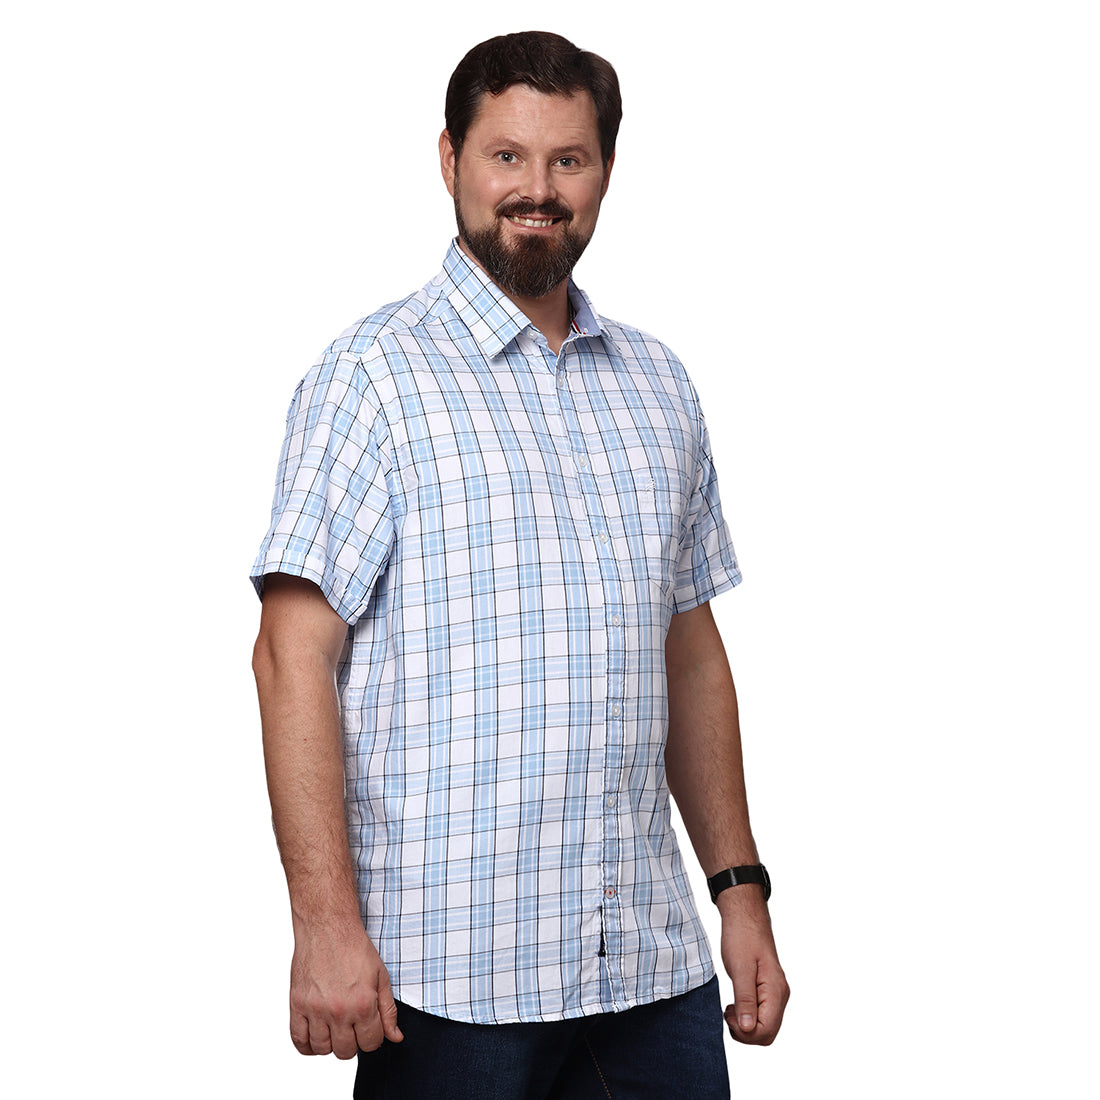 Big & Bold Checks White Half Sleeves Slim Fit Casual Shirts (Plus Size) - Double Two